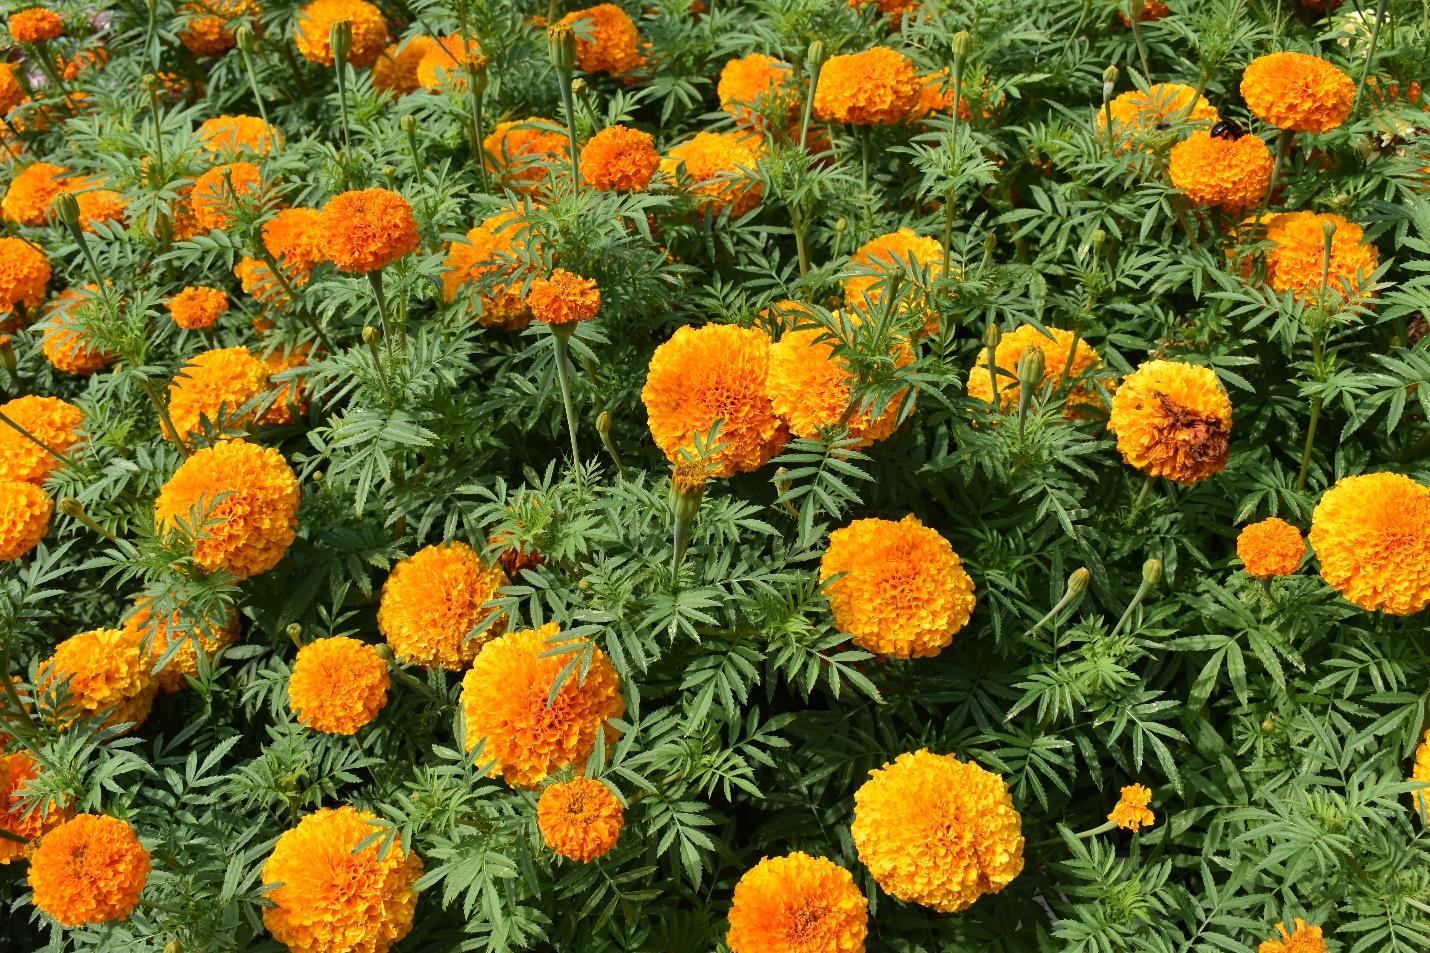 Upcoming open houses at the UGA Trial Gardens offers a sneak peek at this year's trial varieties. Pictured is the ‘Sumati Orange’ Marigold from AmeriSeed, the 2021 Classic City Awards Grand Finale Award winner. 